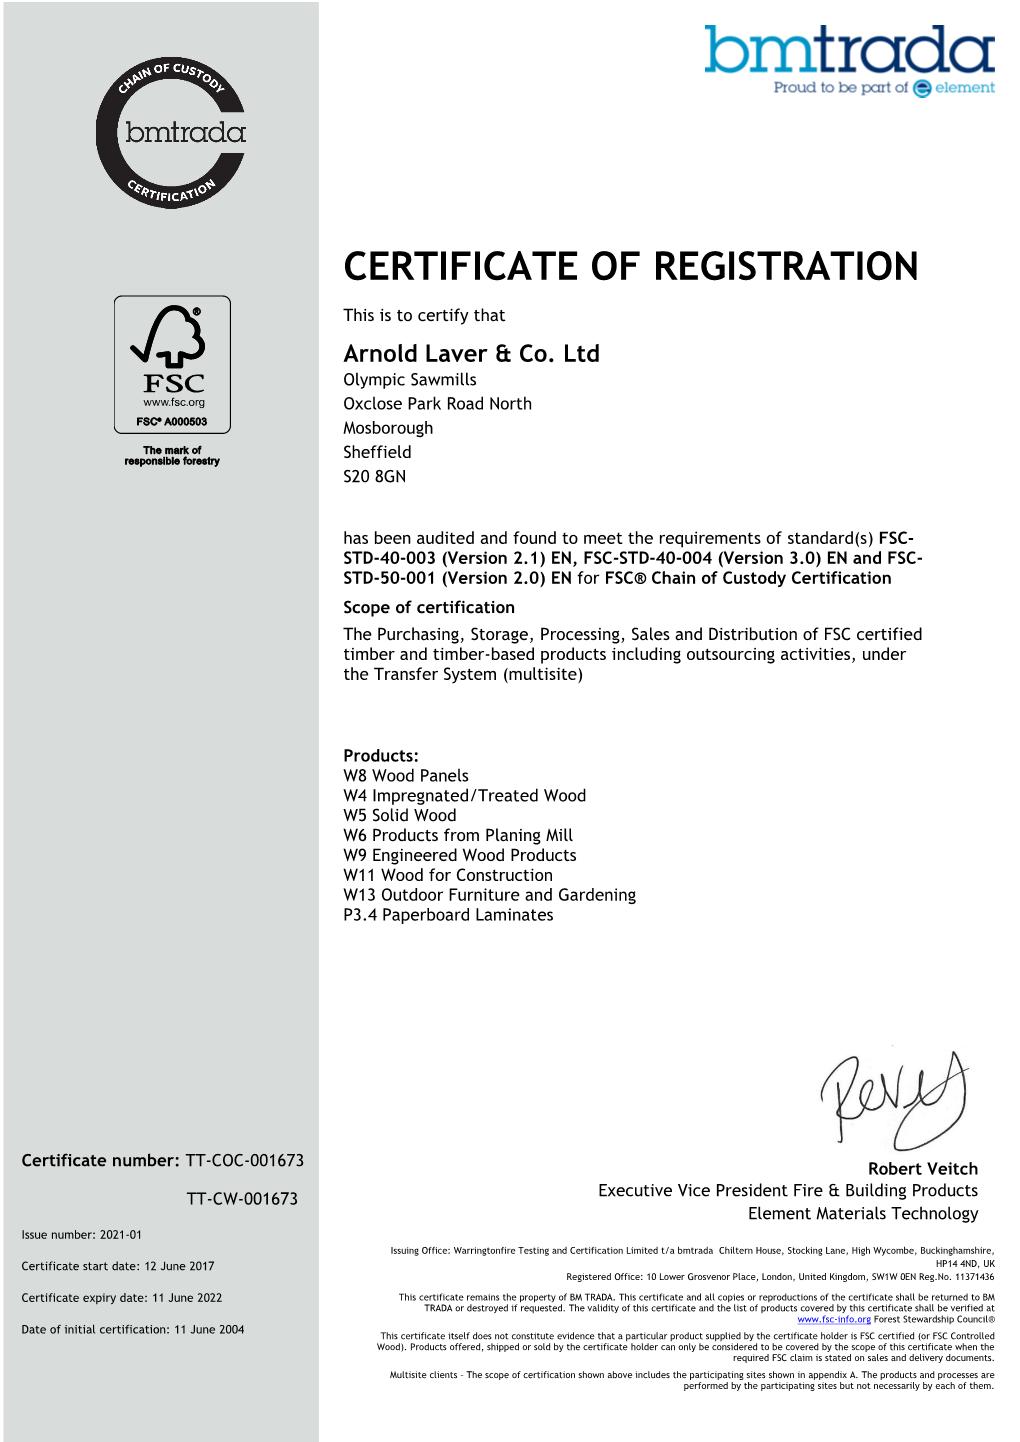 To View Our FSC Certificate